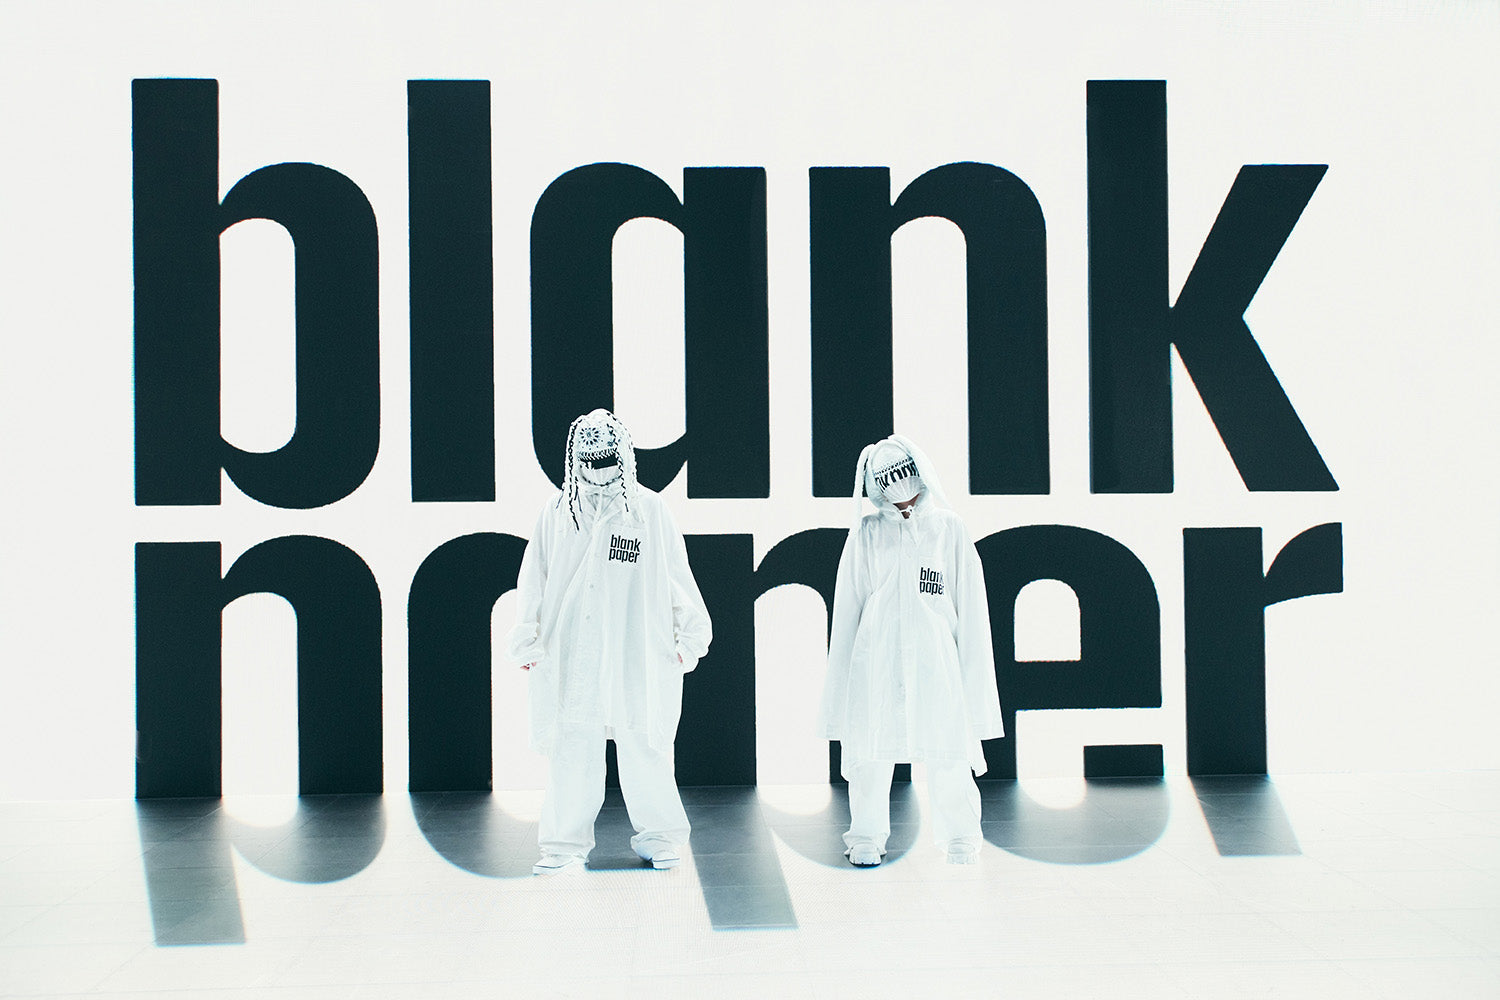 Mysterious new band ‘blank paper’ joins JPU Records. Debut single ‘enemy’ out 17 November